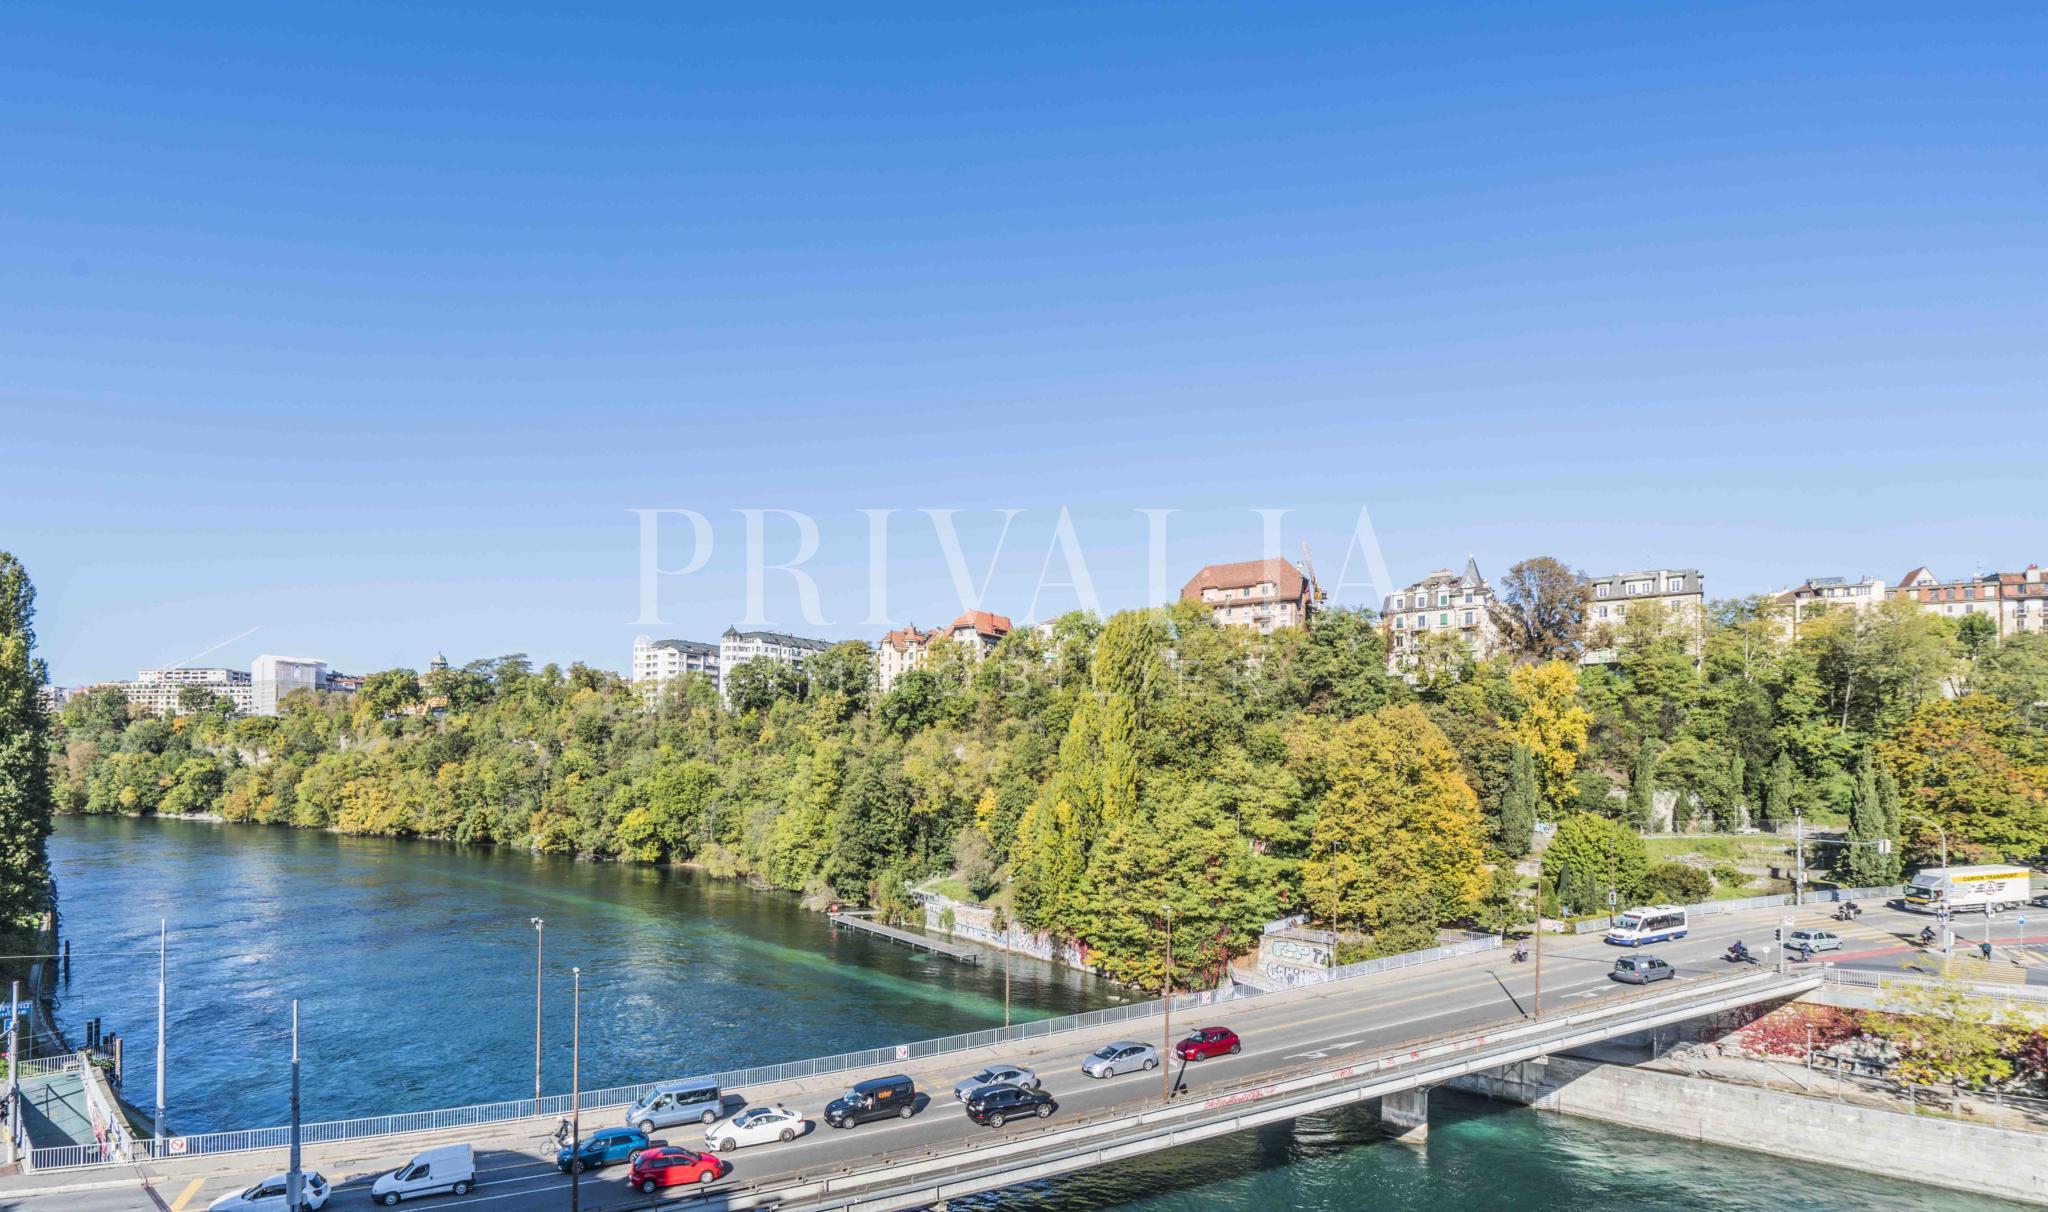 PrivaliaBeautifully furnished apartment with superb view over the Rhône and the city